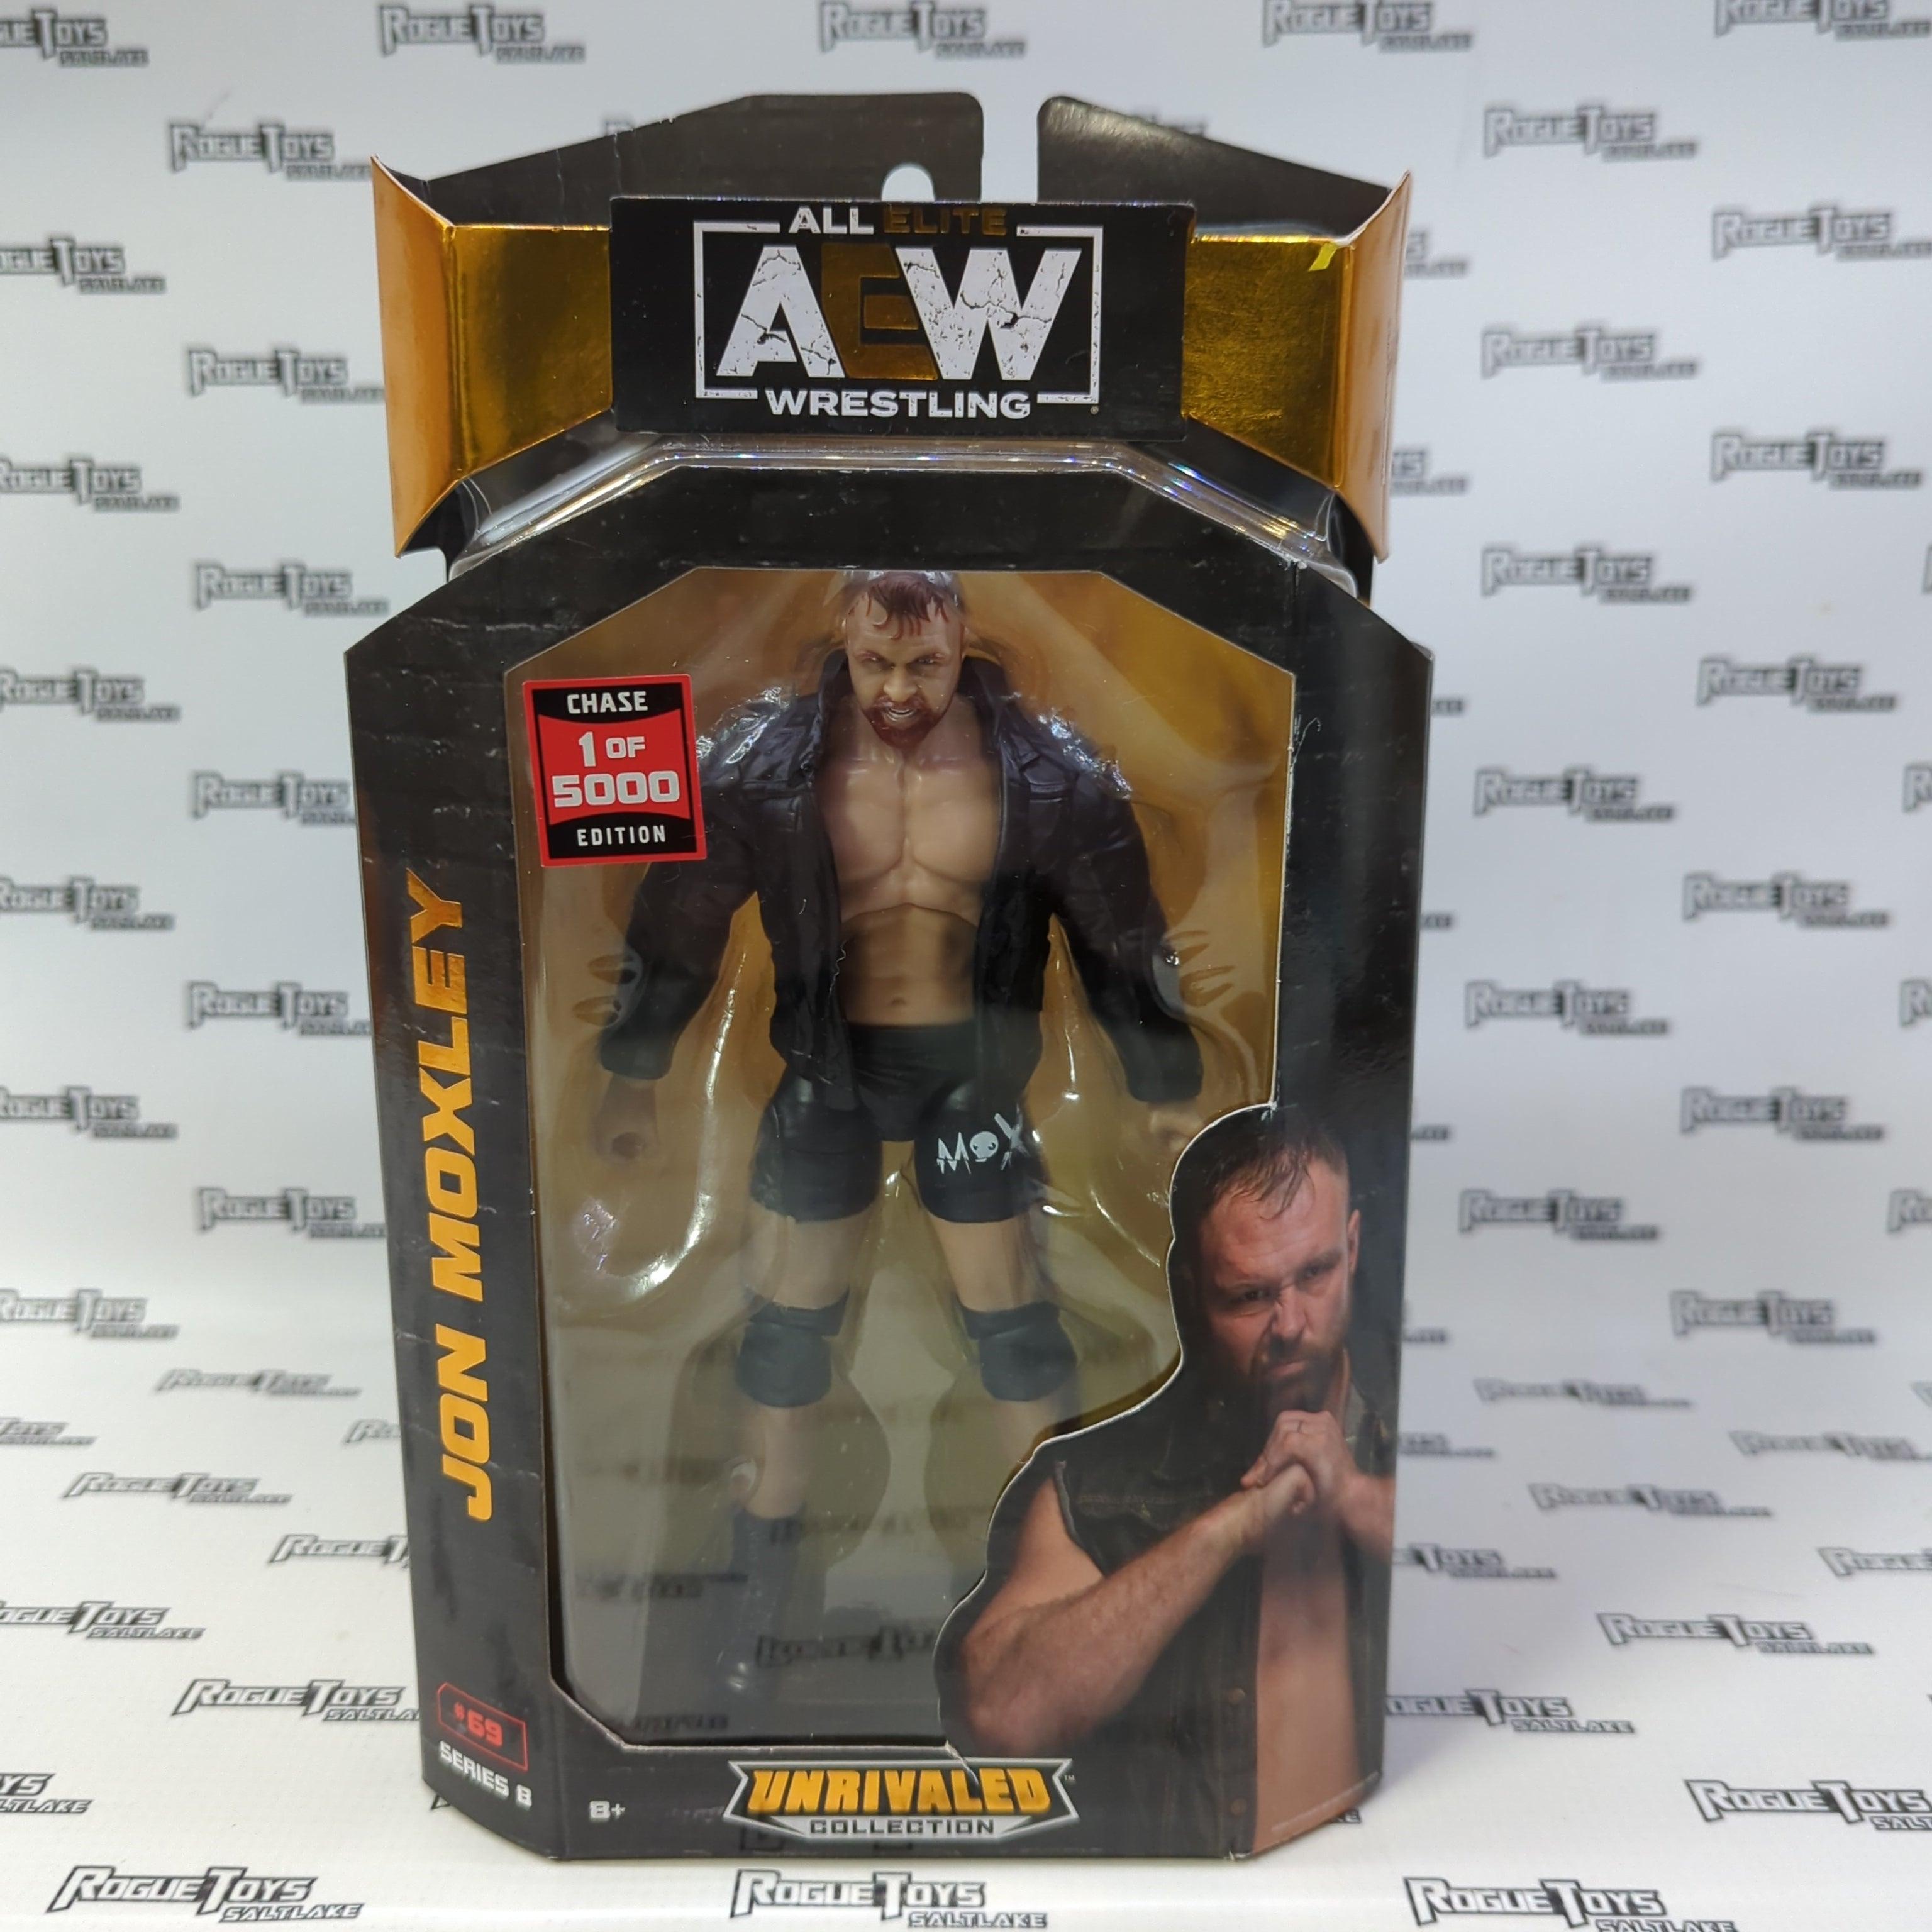 Jazwares AEW Unrivaled Collection Series 8 Jon Moxley (1 of 5000 Chase Edition)